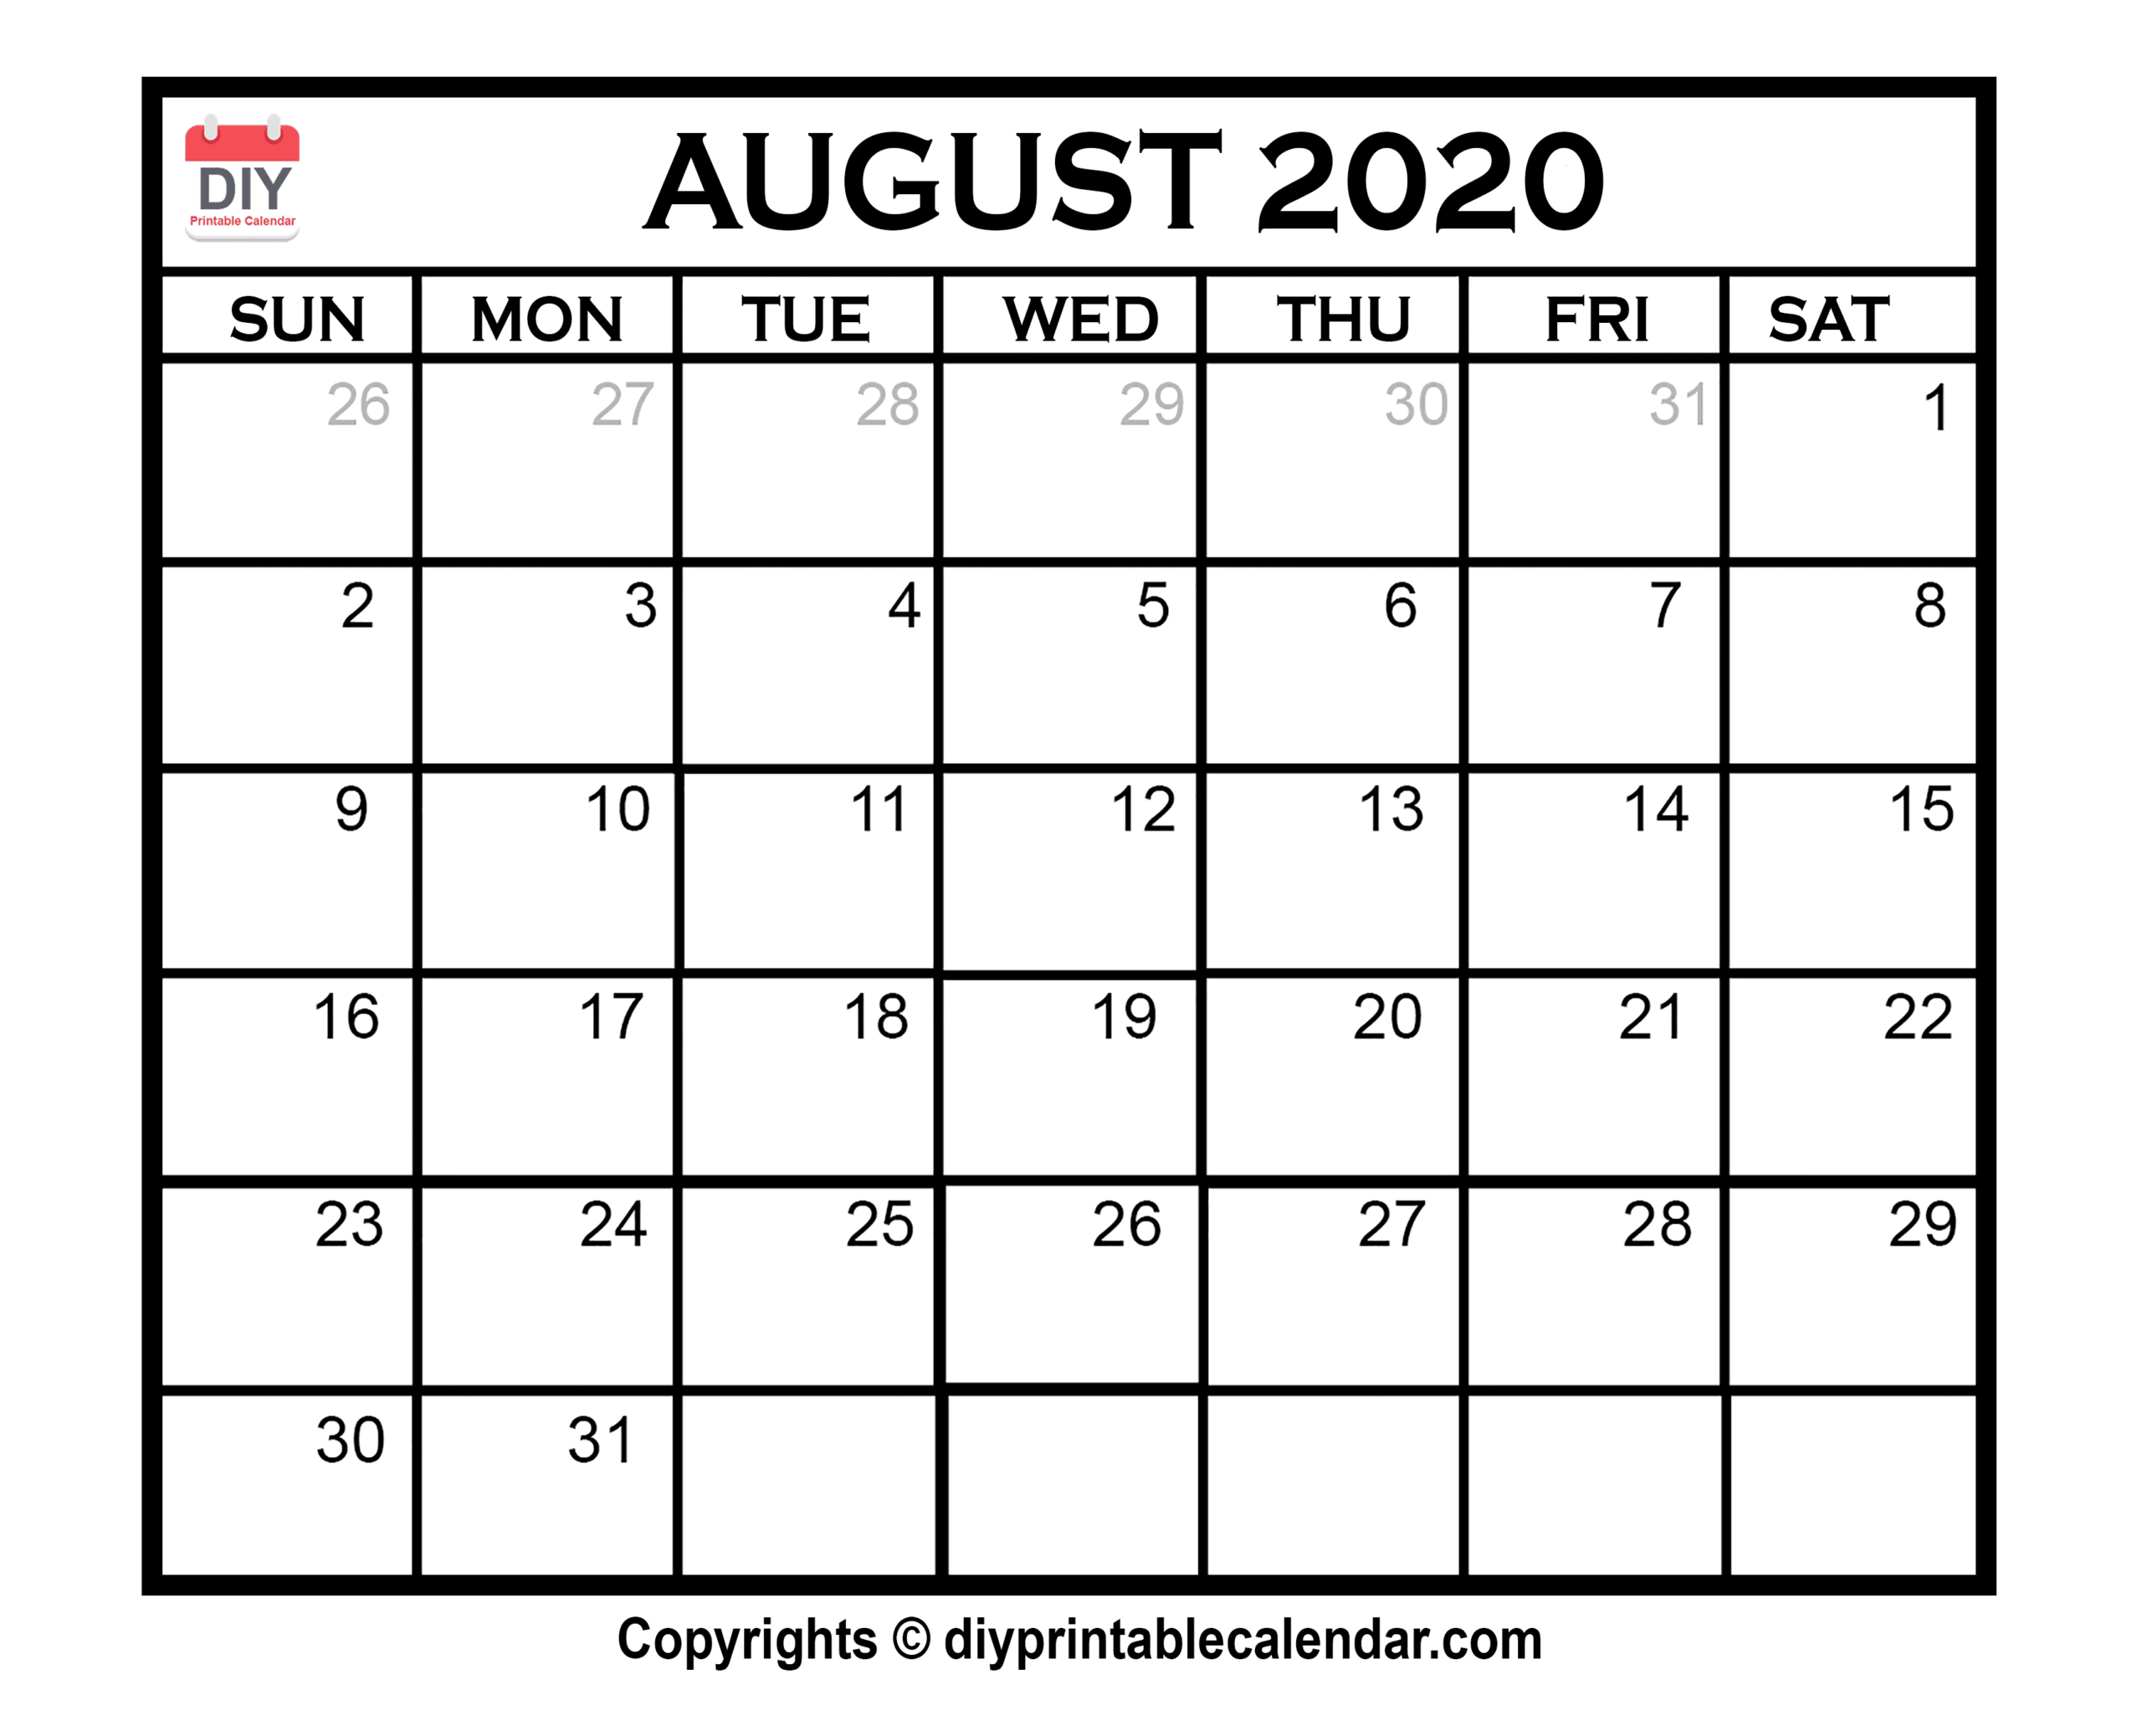 Print Free Calendars Without Downloading August 2020 | Calendar inside Print Free Calendars Without Downloading